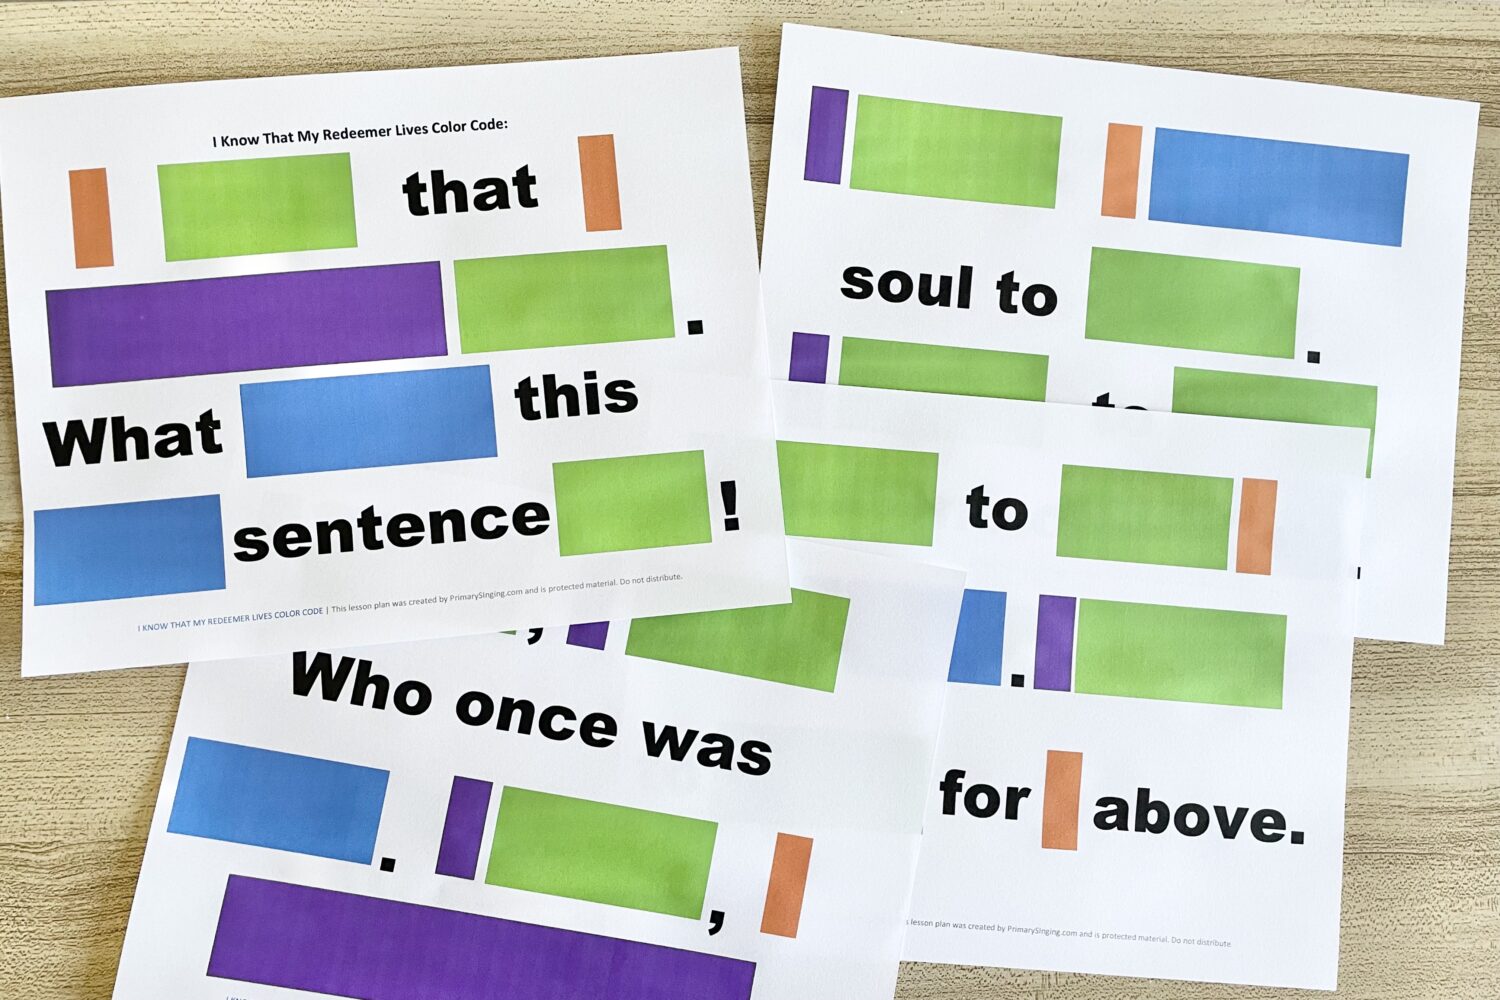 I Know That My Redeemer Lives Color Code - fun logical conclusions singing time idea to crack the code with 4 colors representing lyrics. Includes printable color code and song helps for LDS Primary Music Leaders.